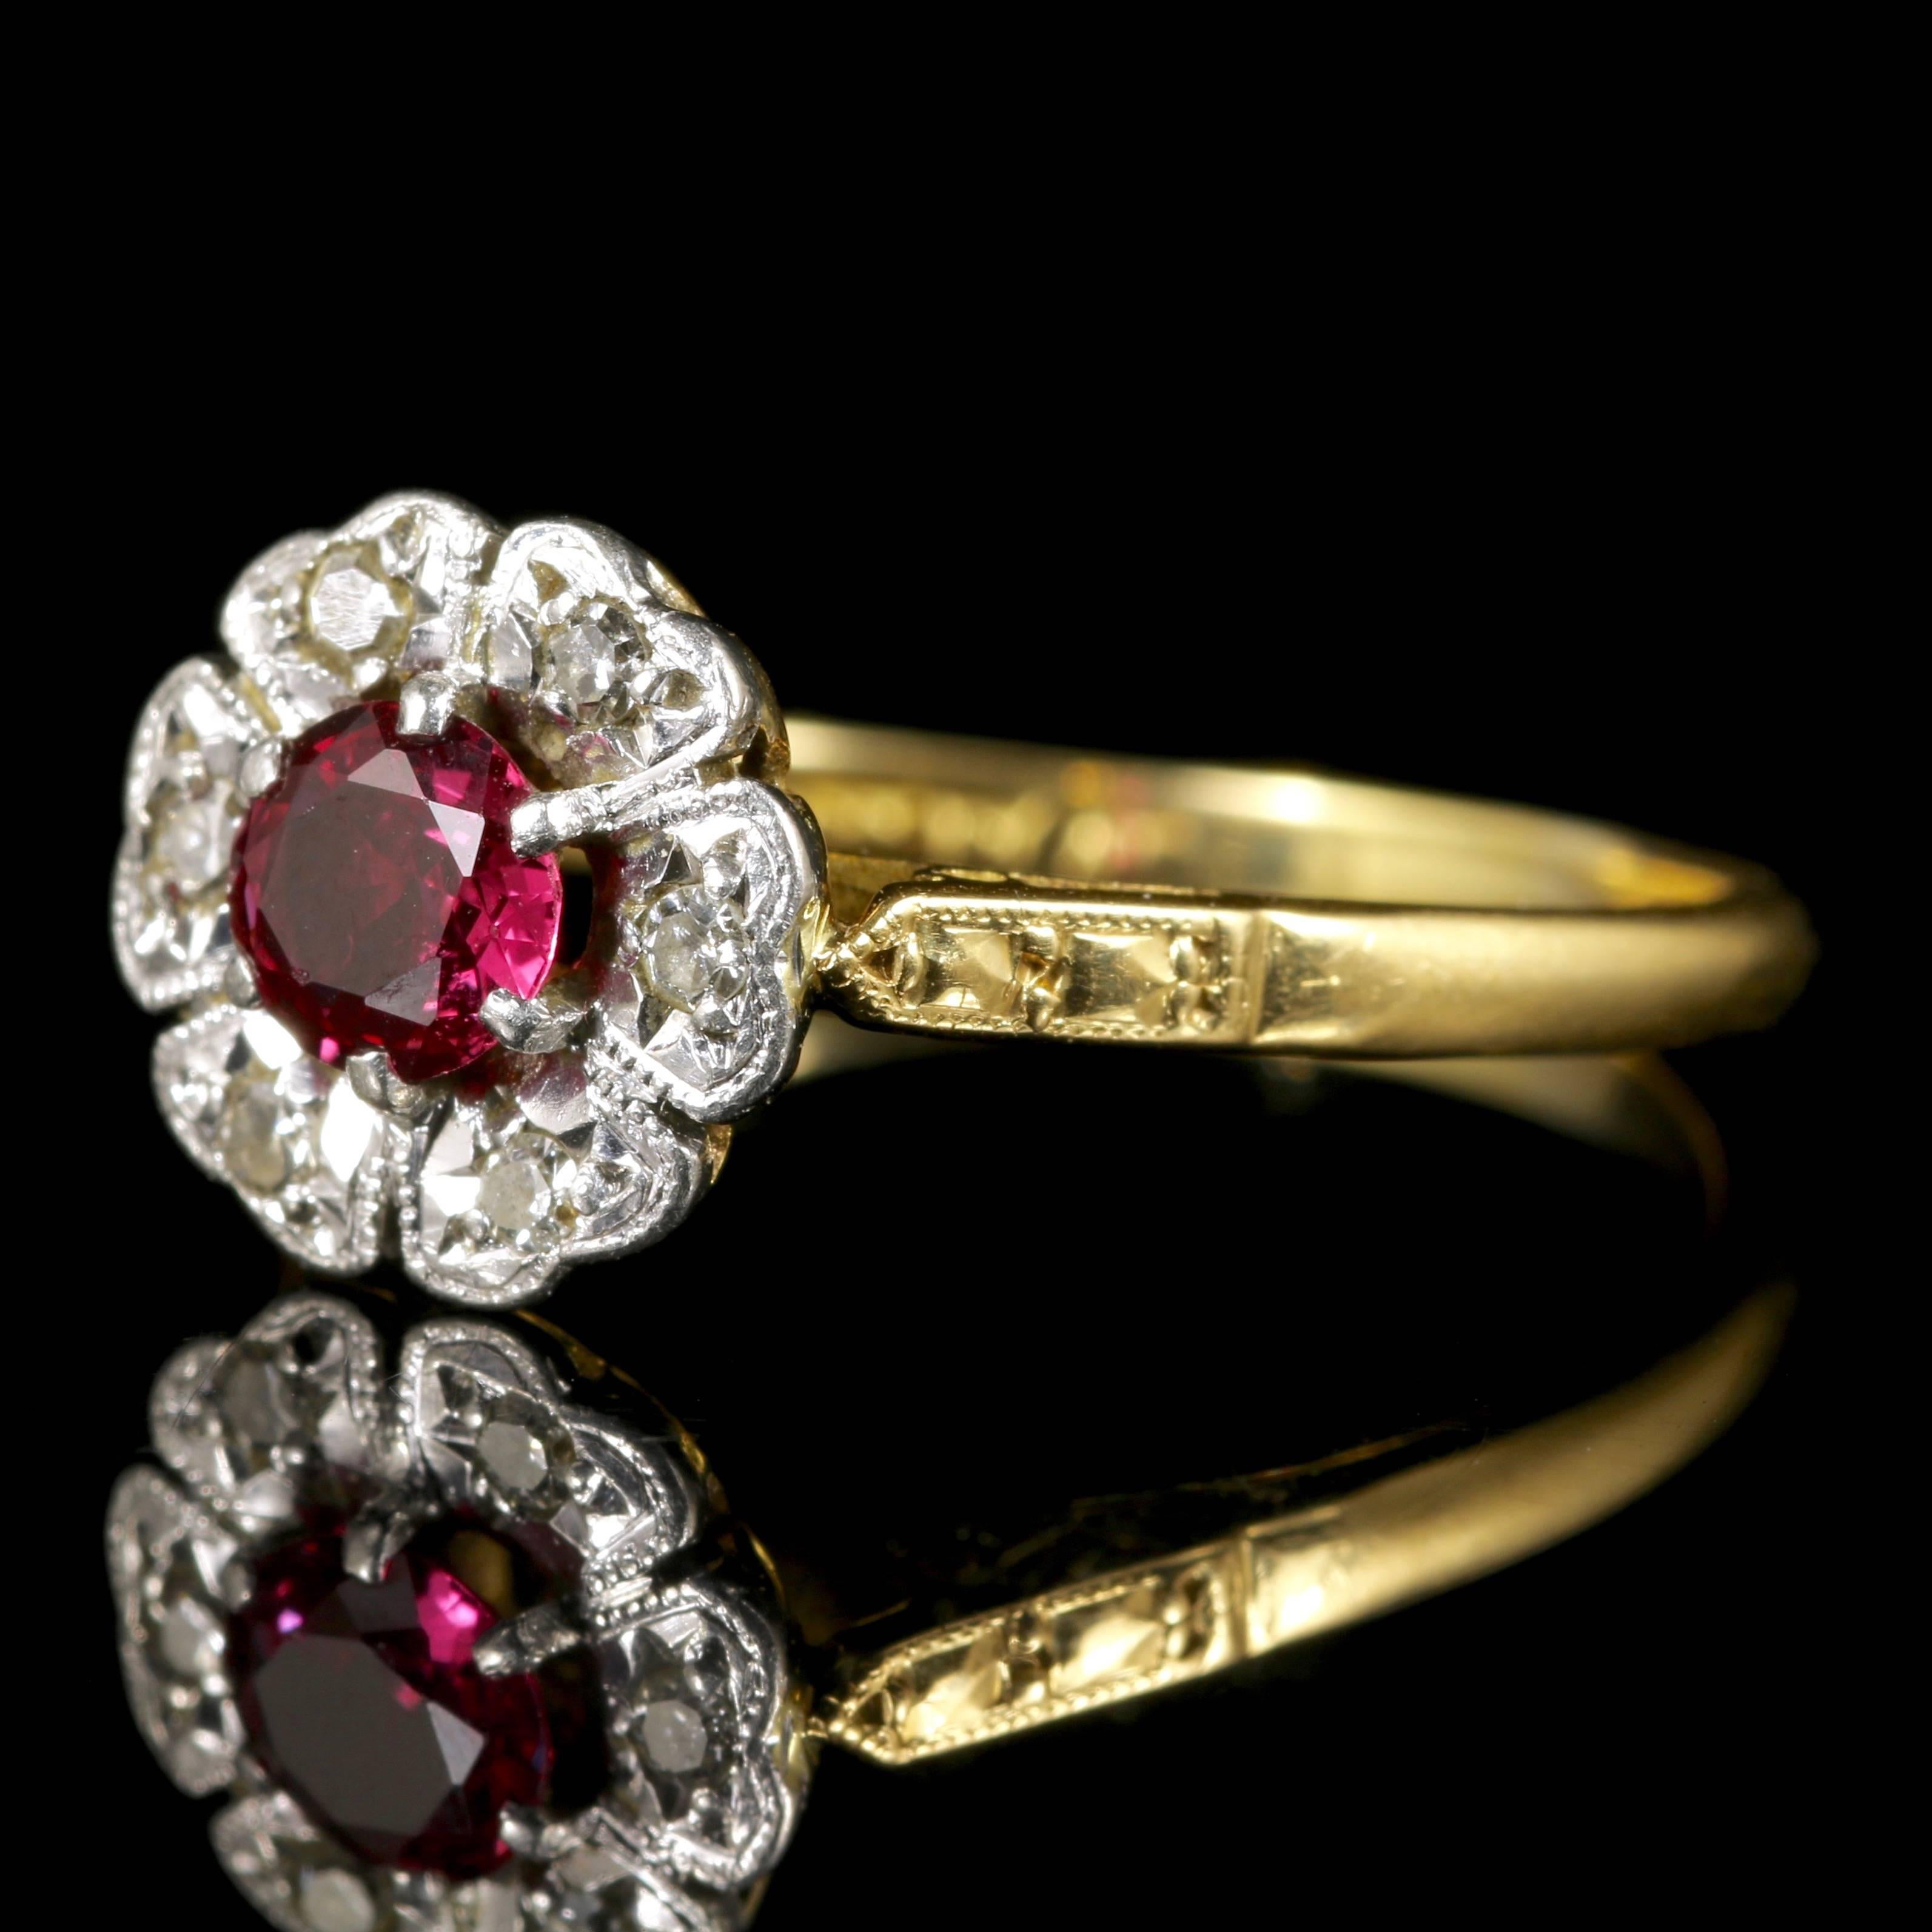 This fabulous antique Victorian 18ct Yellow Gold and Platinum cluster ring is set with a beautiful Ruby and Diamonds.

Circa 1900.

The central Ruby is approx. 0.65ct surrounded by old cut Diamonds.

The Ruby is considered to be the most powerful